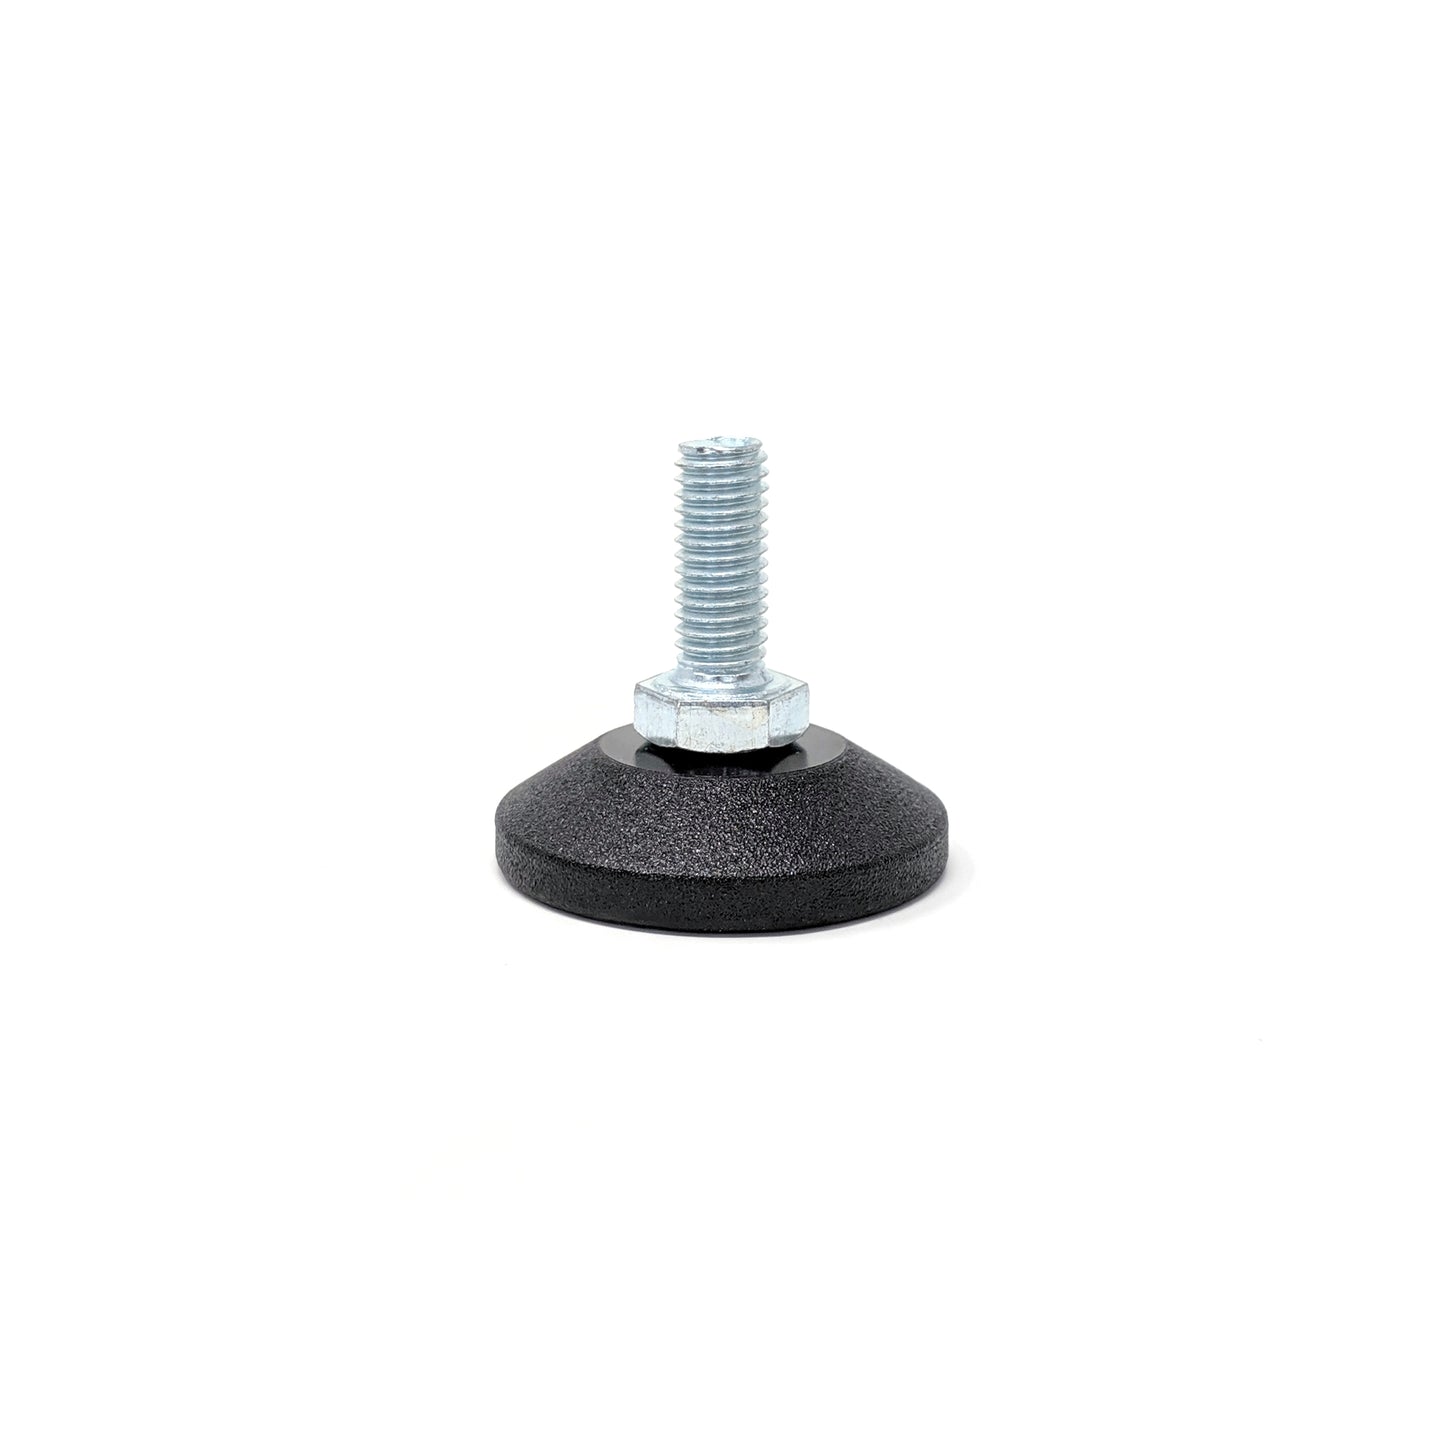 Adjustable Feet, 38mm Dia. Base, M8 20mm Thread, 400kg Static Load Capacity - Made In Germany - Keay Vital Parts